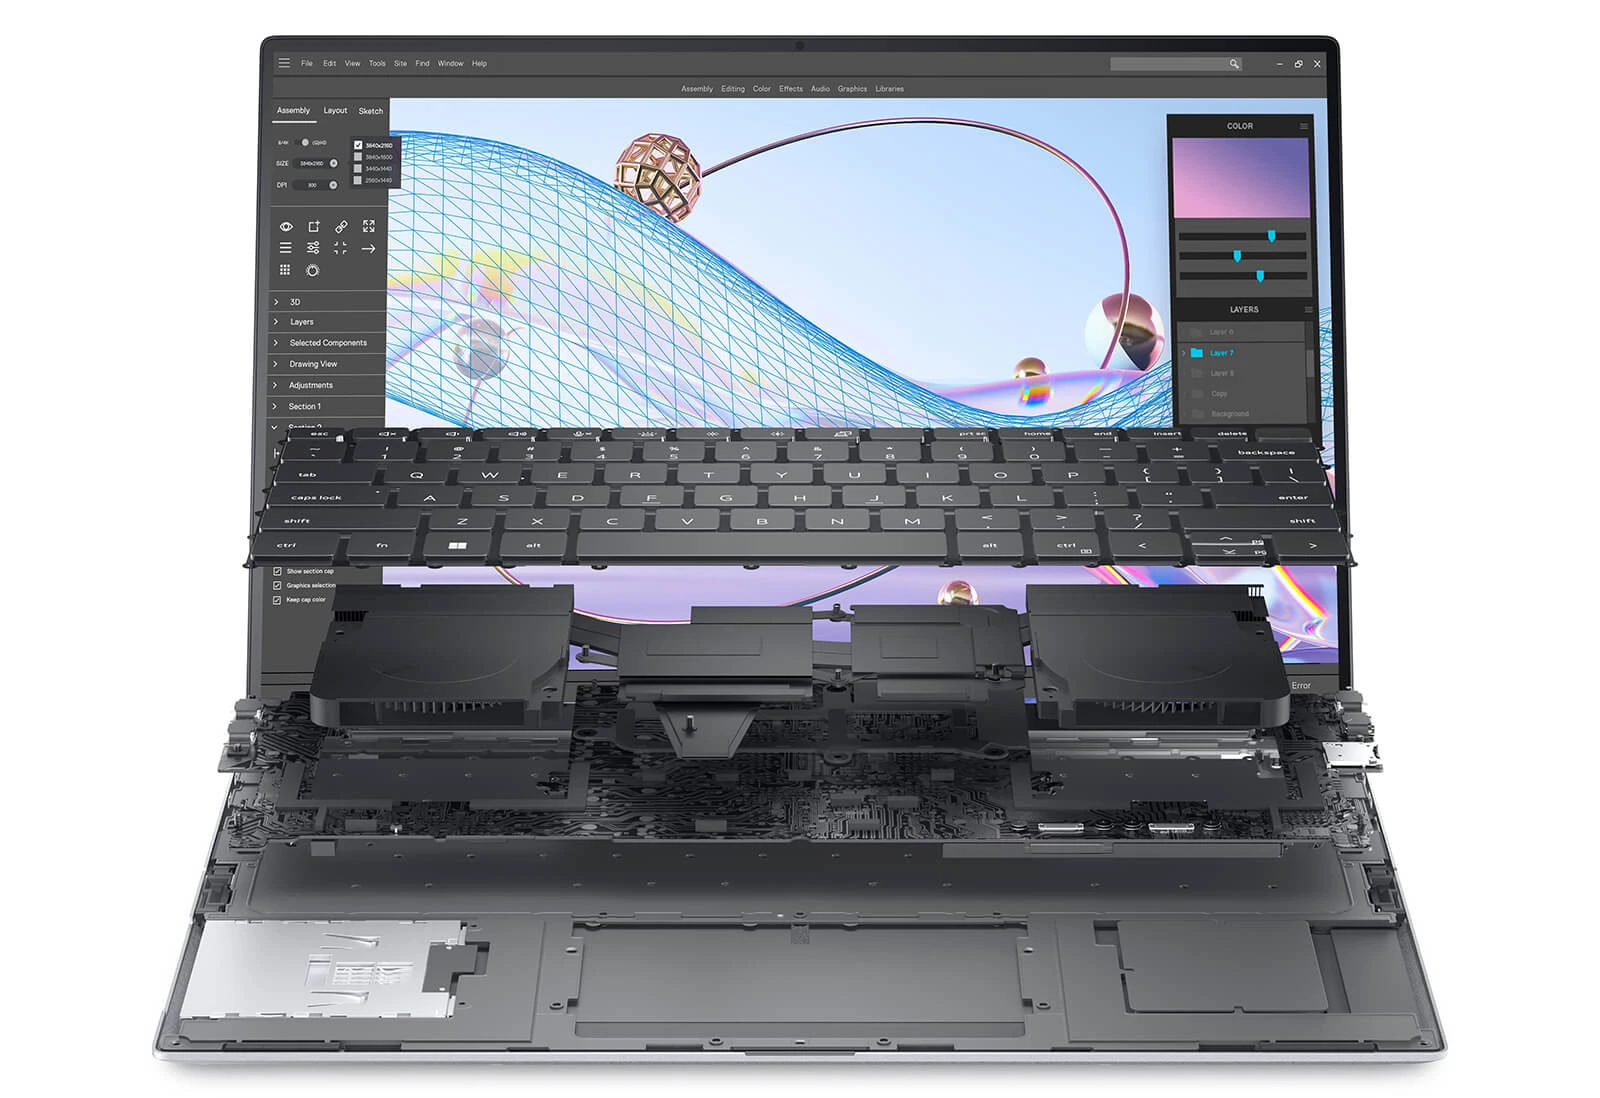 Dell Precision 5470 Mobile Workstation (2022) Features 05